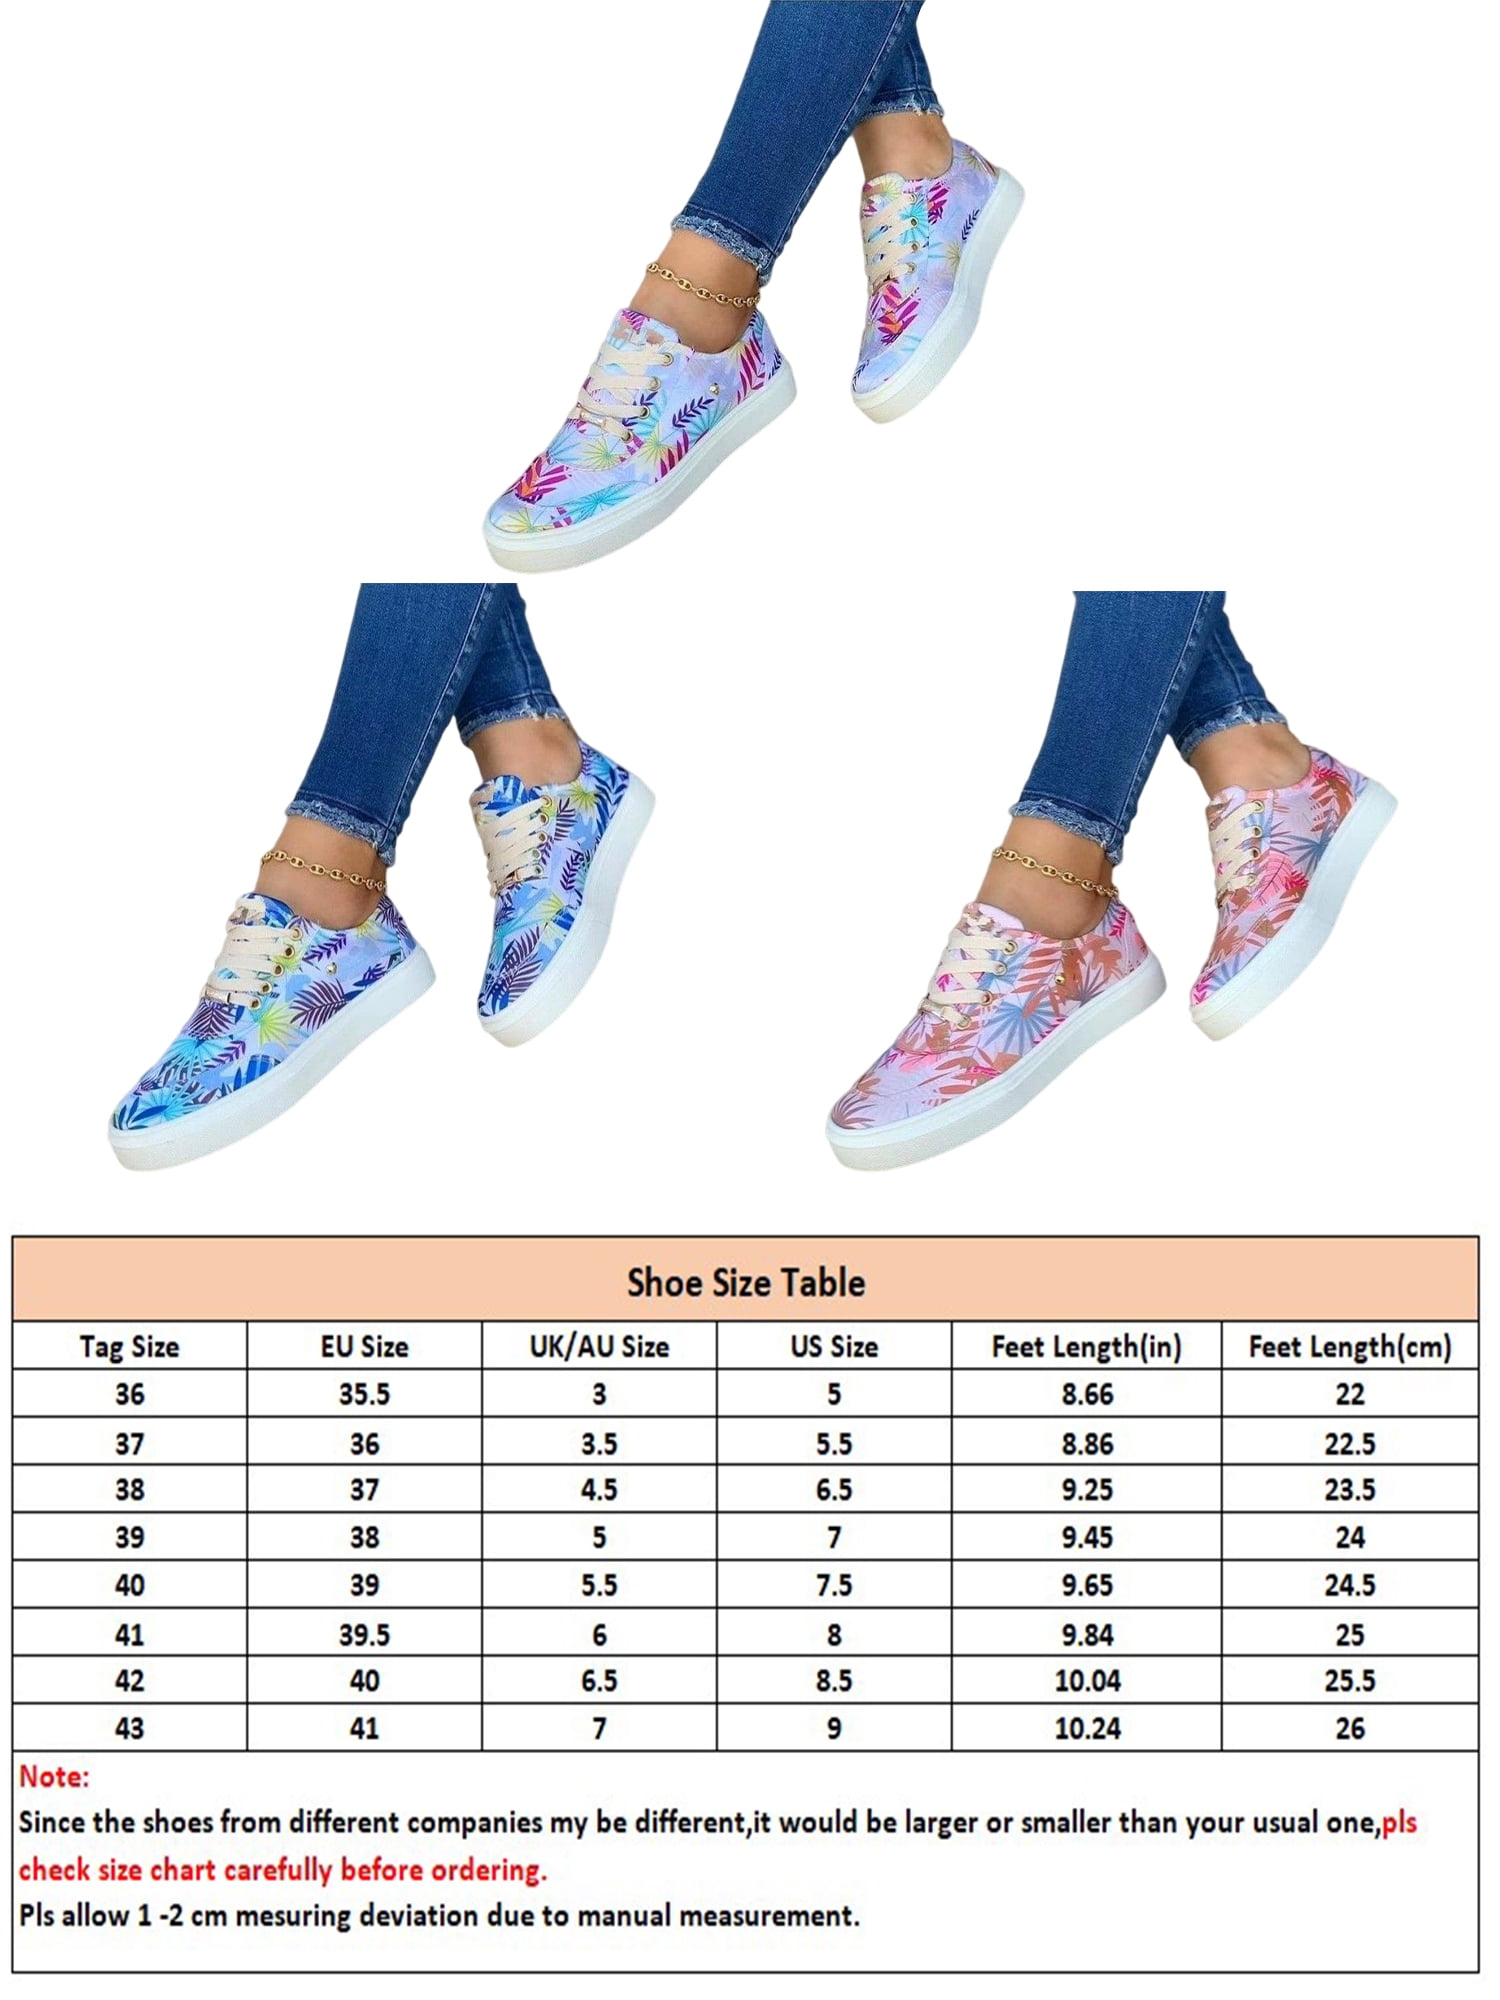 Avamo Ladies Running Shoe Breathable Athletic Shoes Sport Canvas Sneakers  Women's Flats Womens Lightweight Floral Sneaker Pink 5.5 